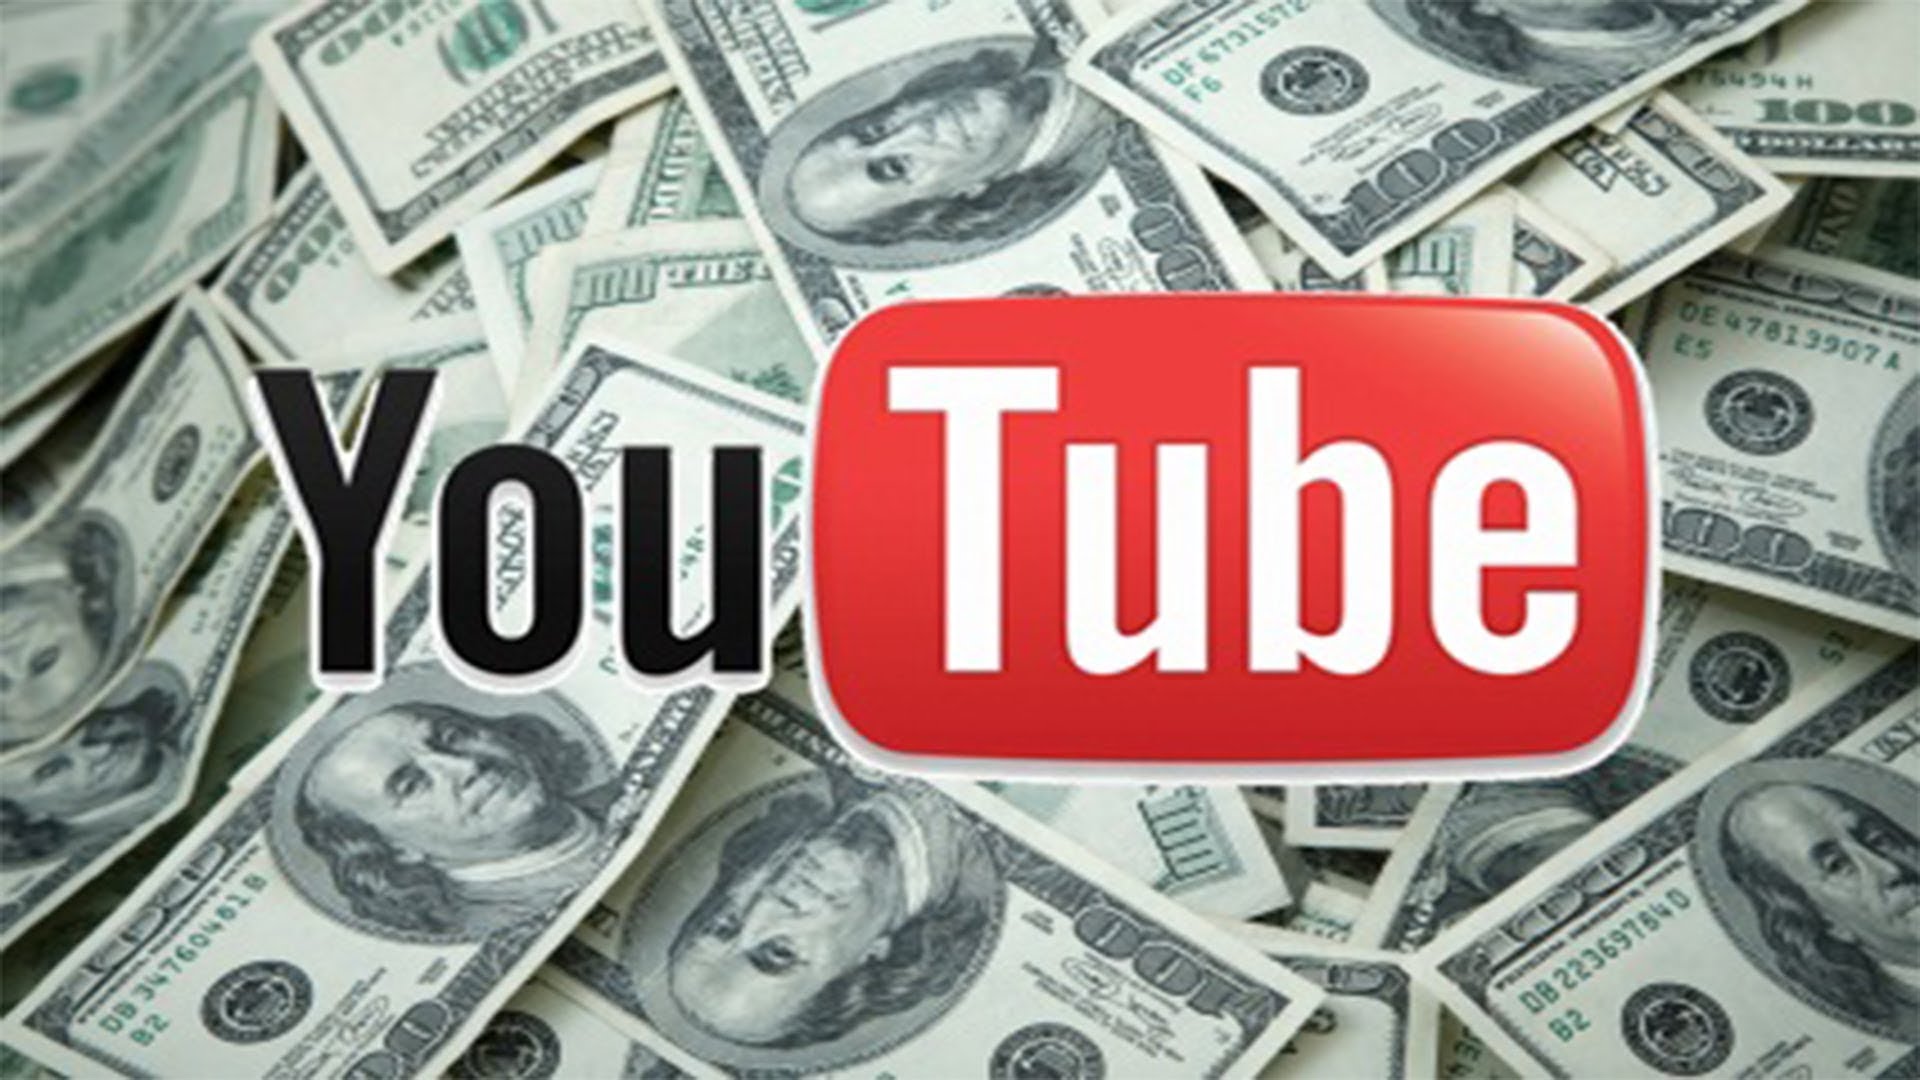 YouTube are prepping a feature for third-party subscriptions from their site